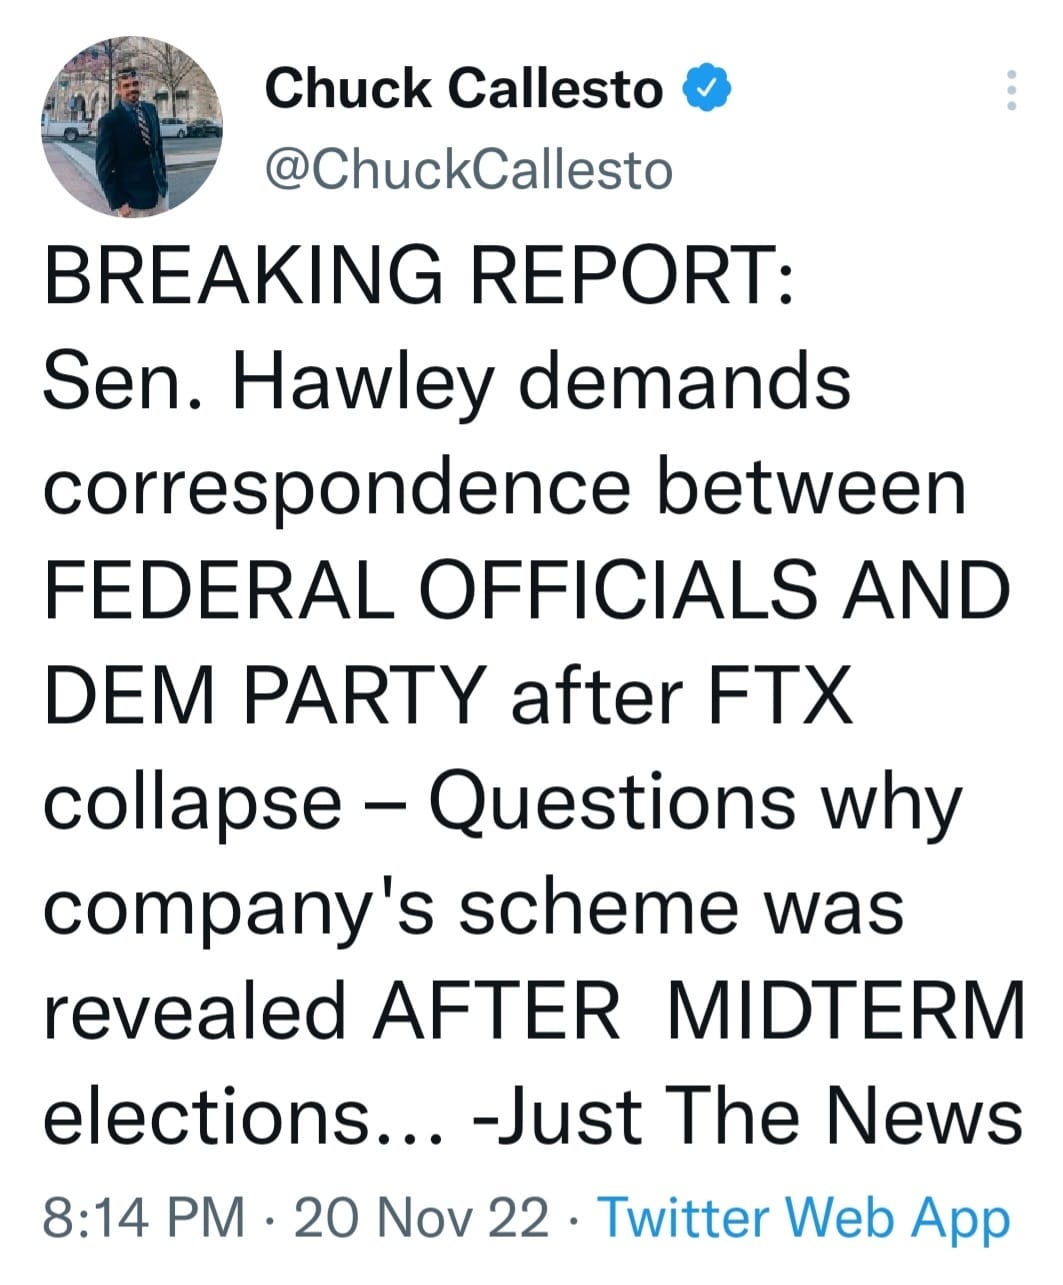 May be a Twitter screenshot of 1 person and text that says 'Chuck Callesto @ChuckCallesto BREAKING REPORT: Sen. Hawley demands correspondence between FEDERAL OFFICIALS AND DEM PARTY after FTX collapse Questions why company's scheme was revealed AFTER MIDTERM elections... -Just The News 8:14 PM. 20 Nov 22. Twitter Web App'